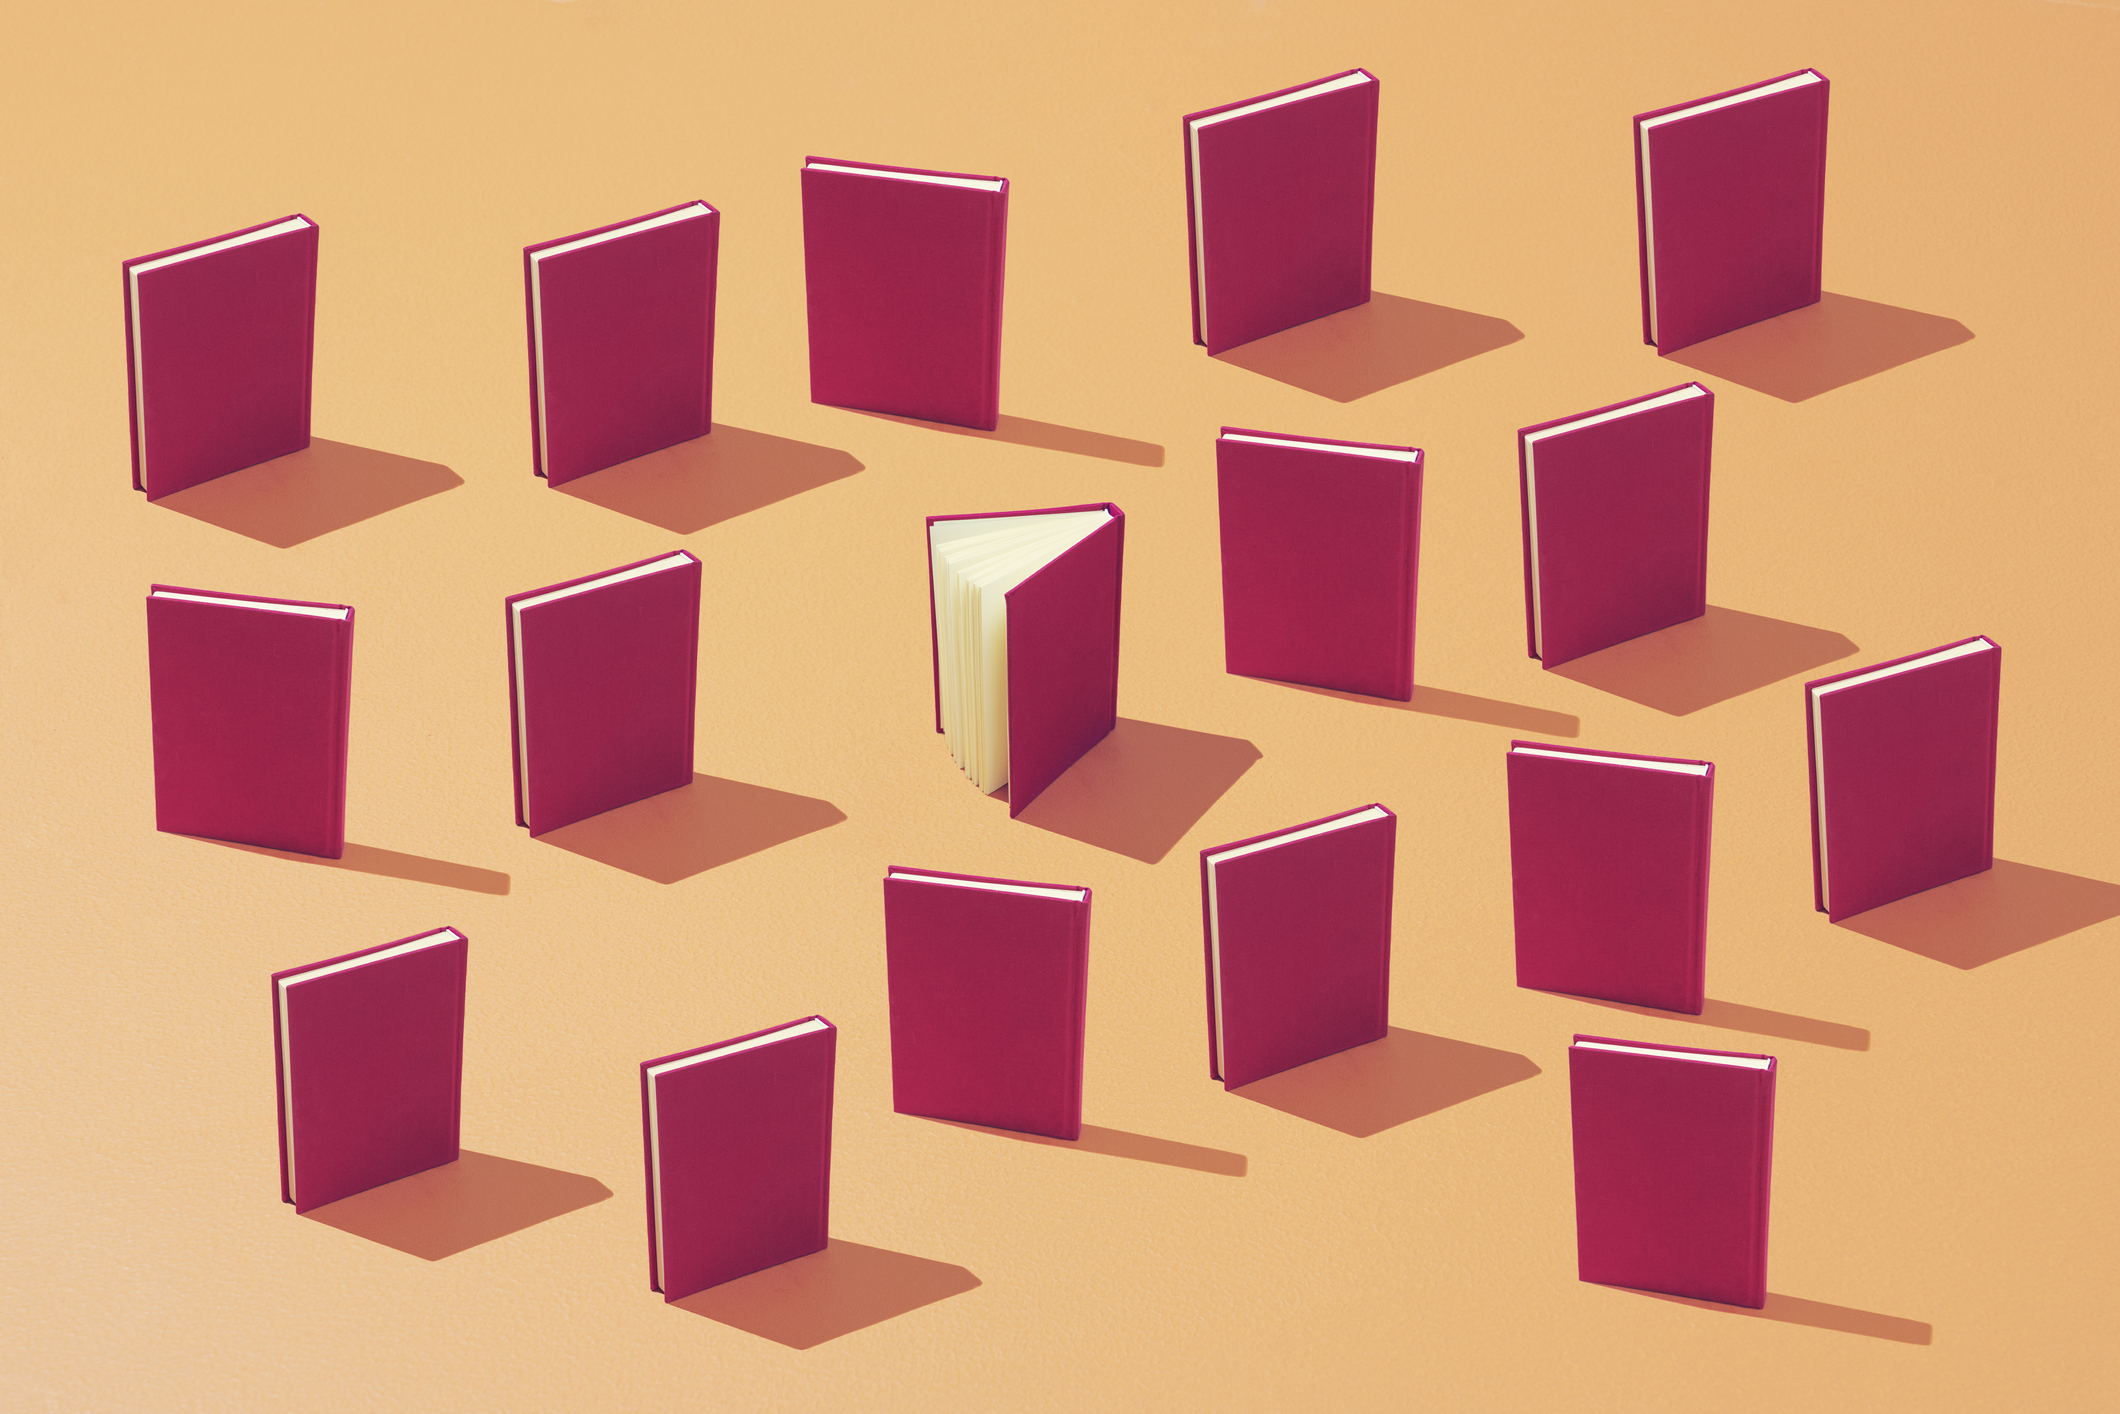 A group of books laid in a pattern on a colorful background. one is standing out from the crowd